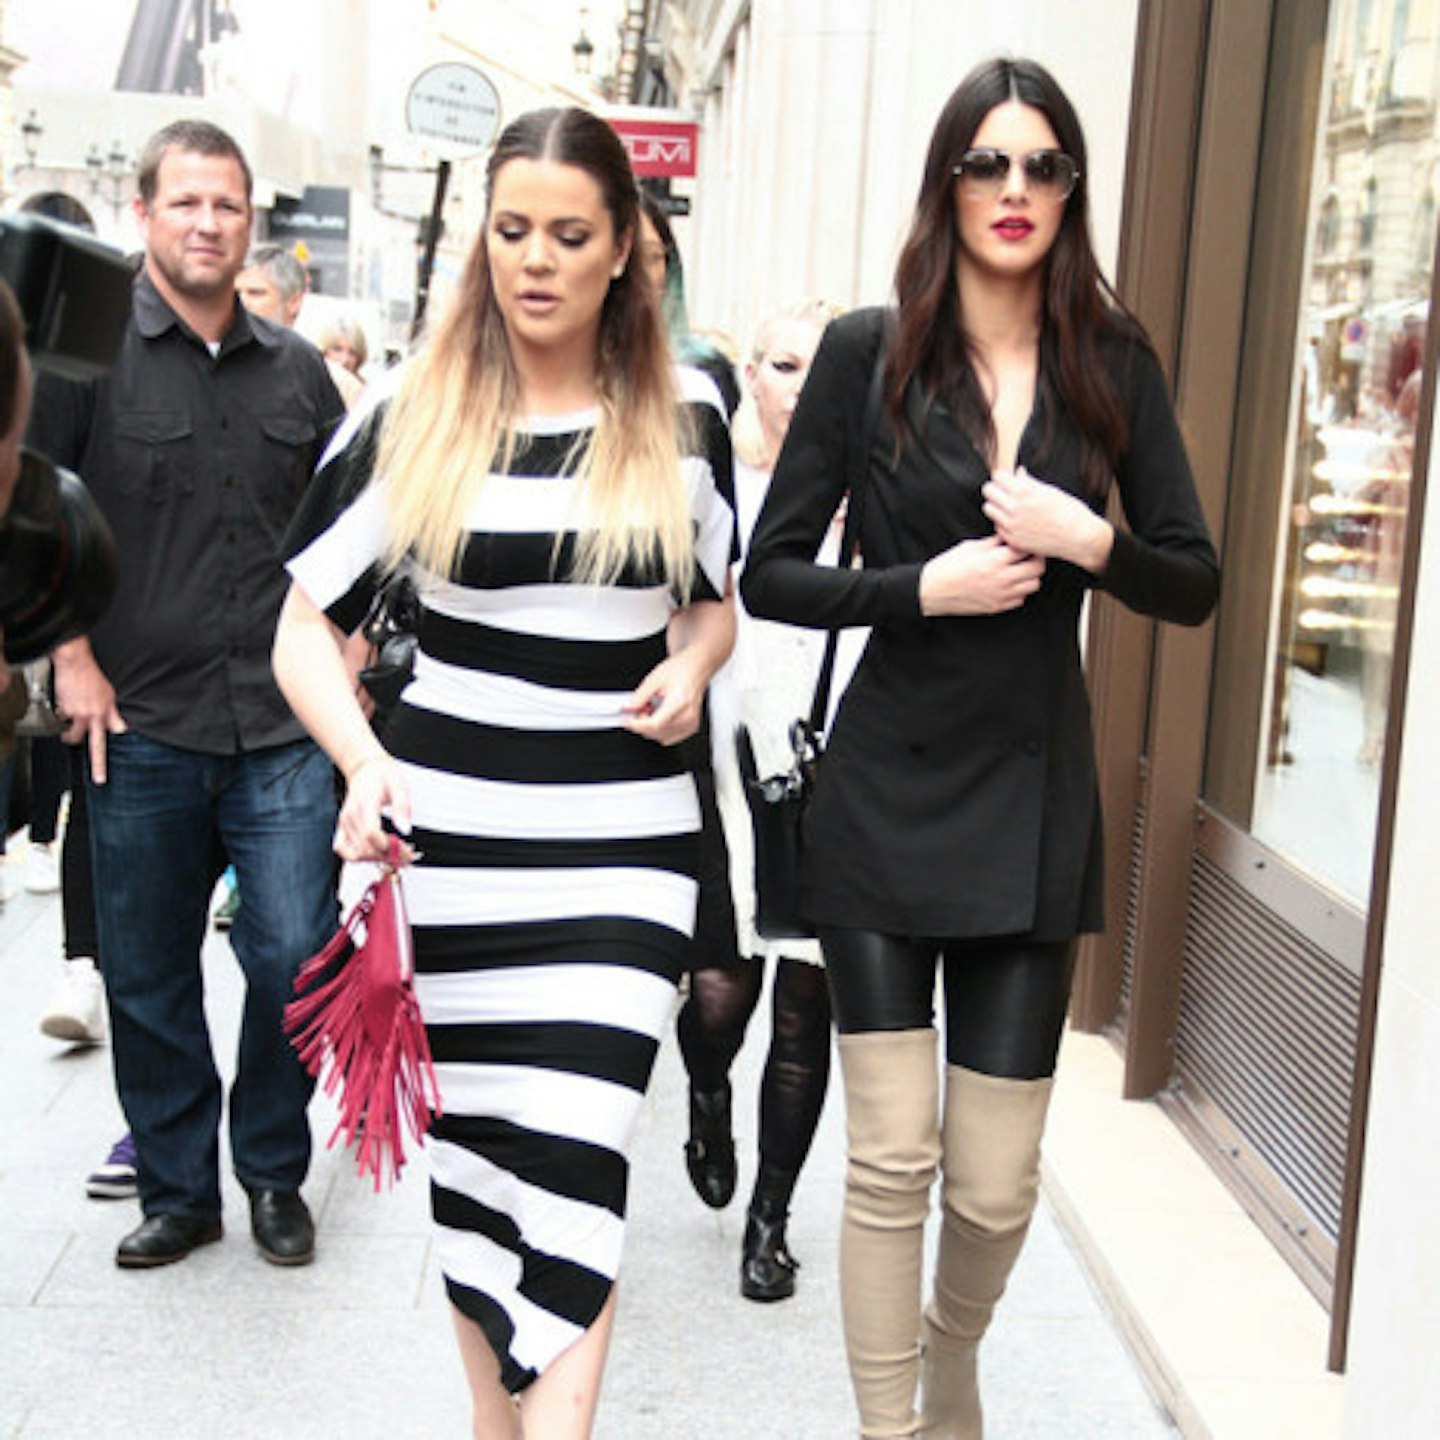 Khloe and Kendall think Kim is overreacting